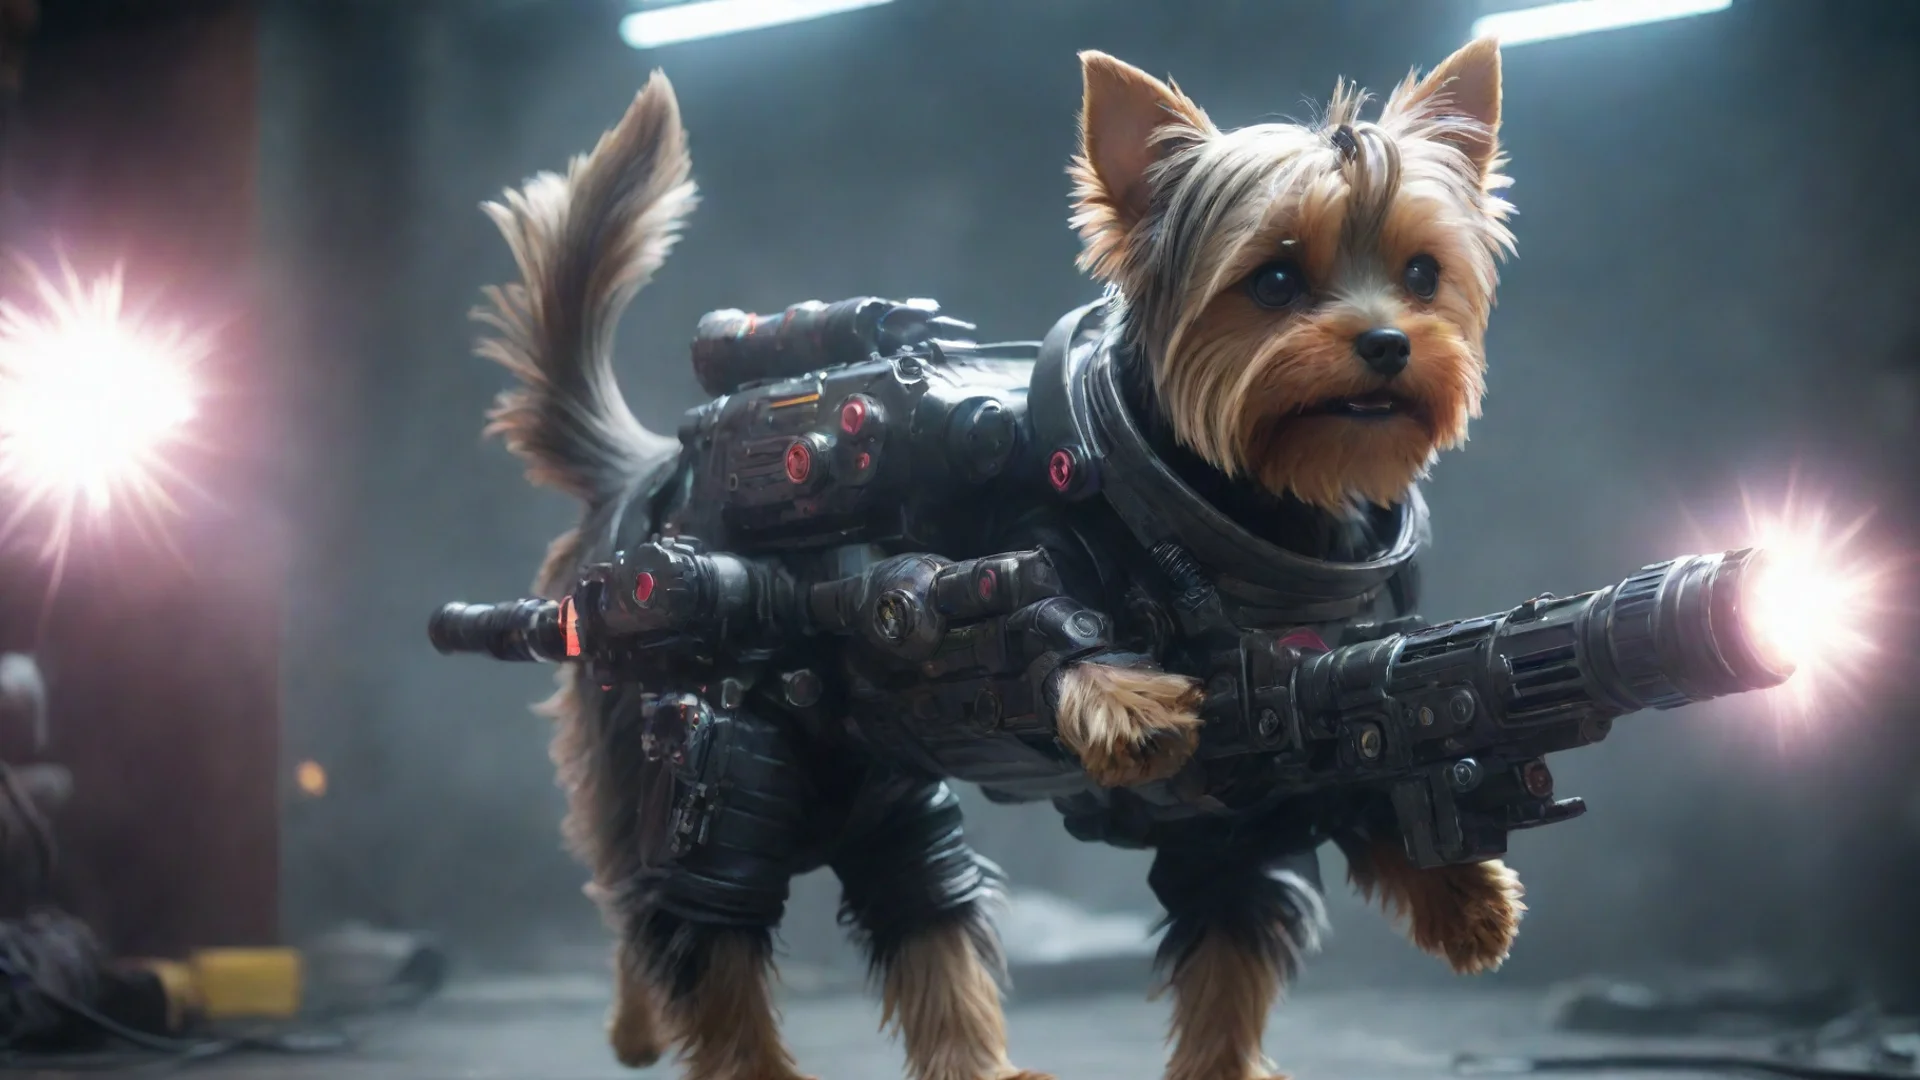 aione yorkshire terrier in a cyberpunk space suit firing big weapon lot lighting wide